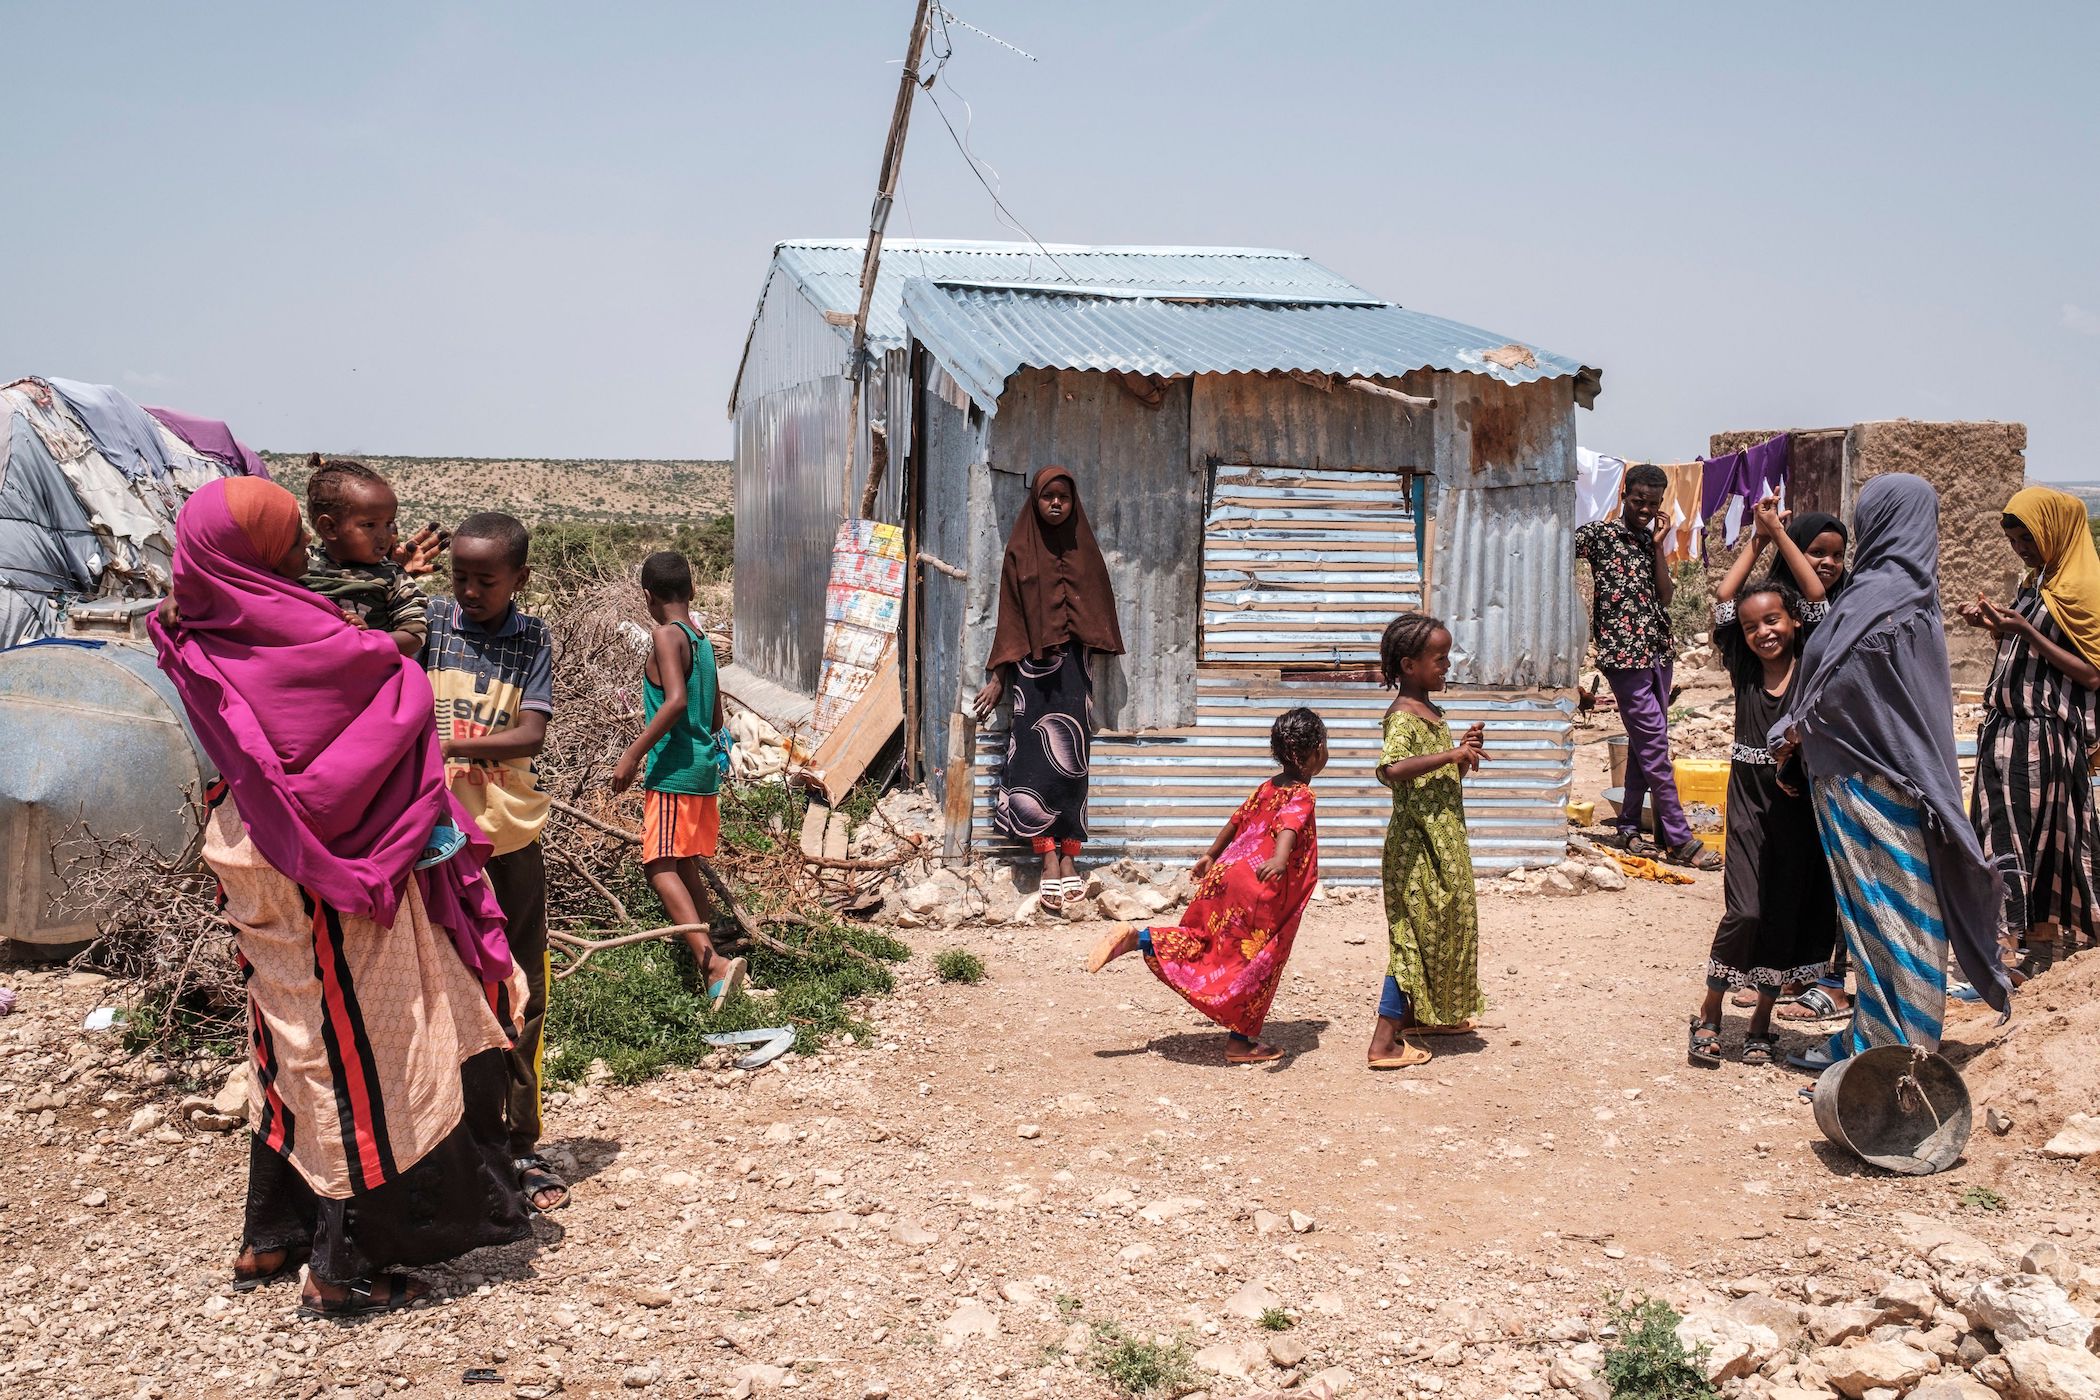 People stand outside of their homes in an informal settlement of internally displaced people in the outskirts of the city of Hargeisa, Somaliland, on September 16, 2021.